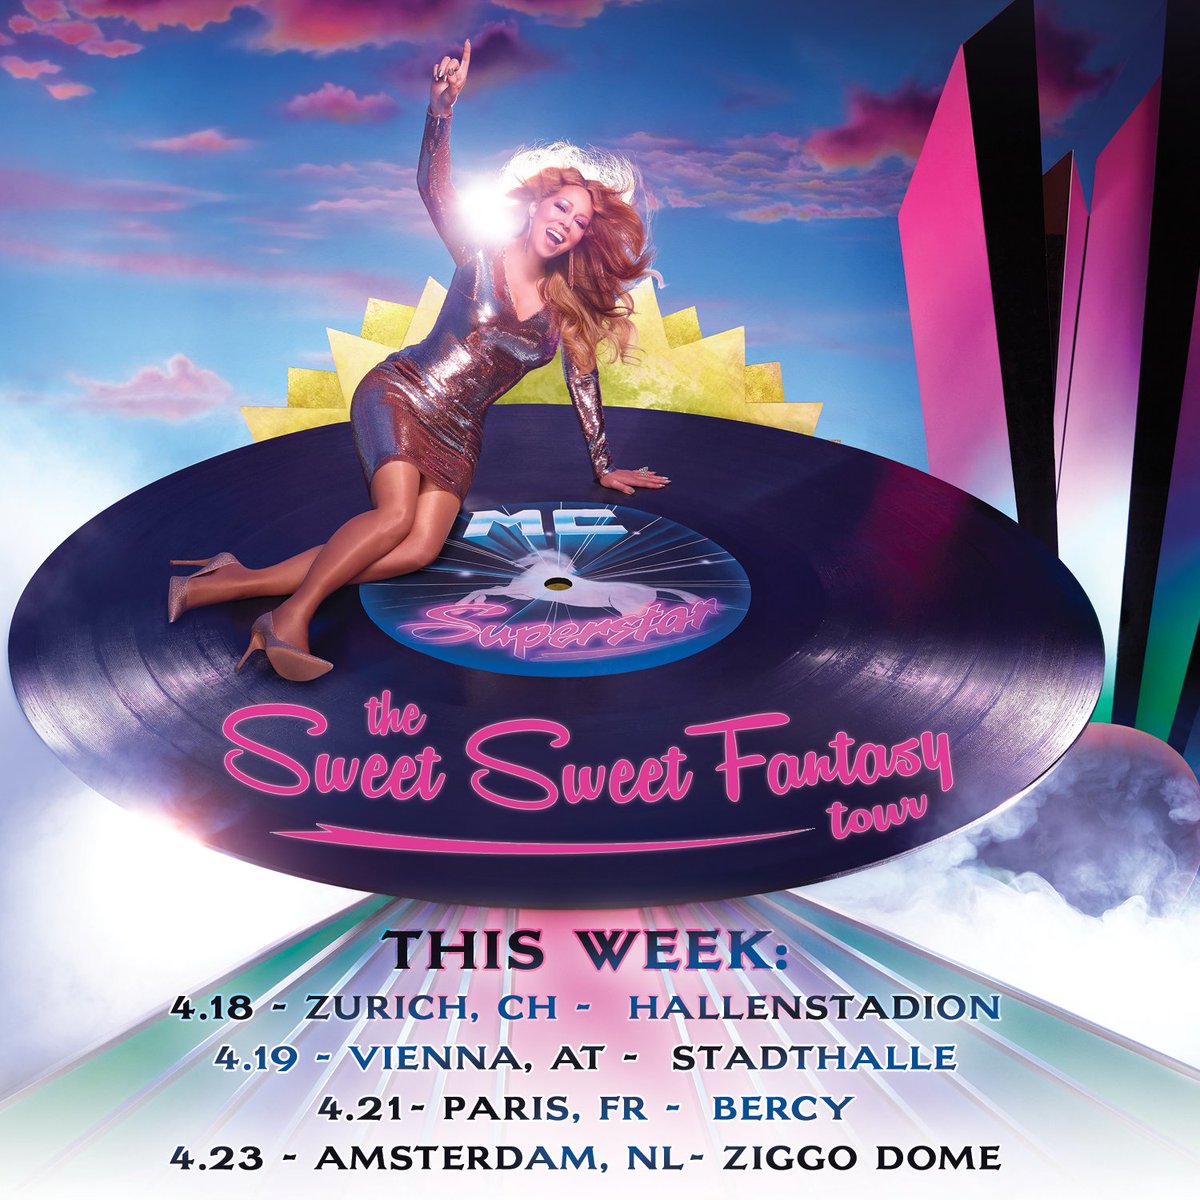 Who's joining me for the #sweetsweetfantasytour this week? ???? Tickets: https://t.co/Fjk9ODyMDy #lambs https://t.co/i7hVBr5mO2